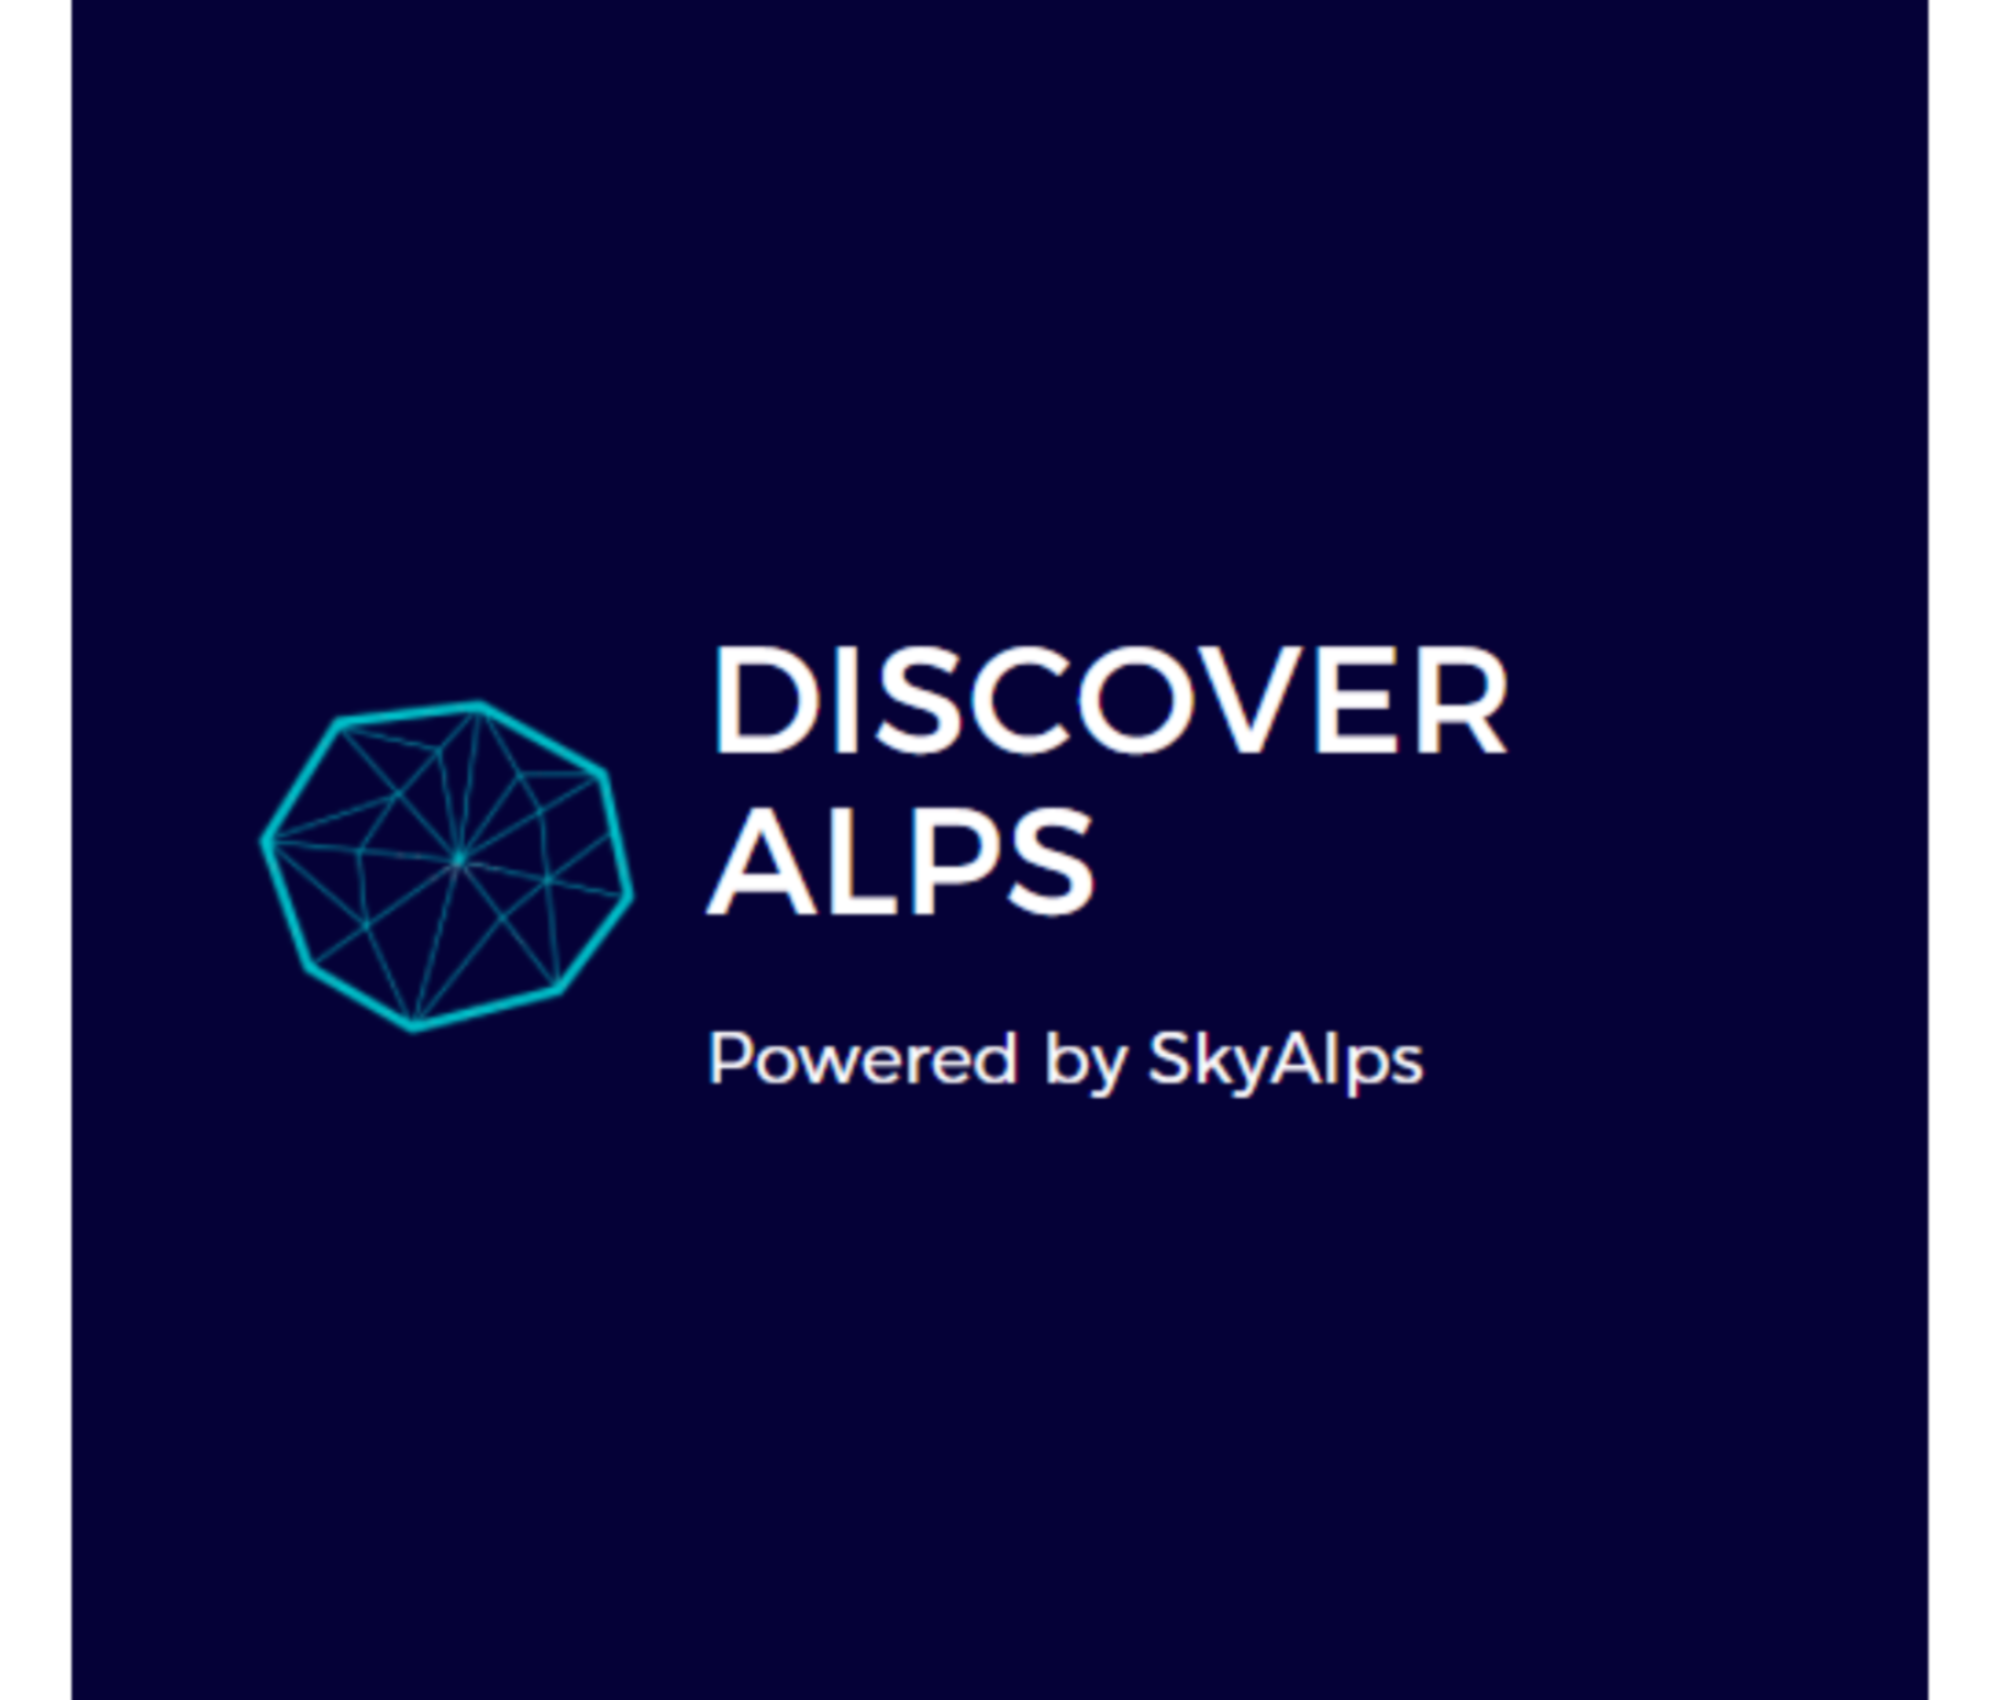 DiscoverAlps - powered by SkyAlps